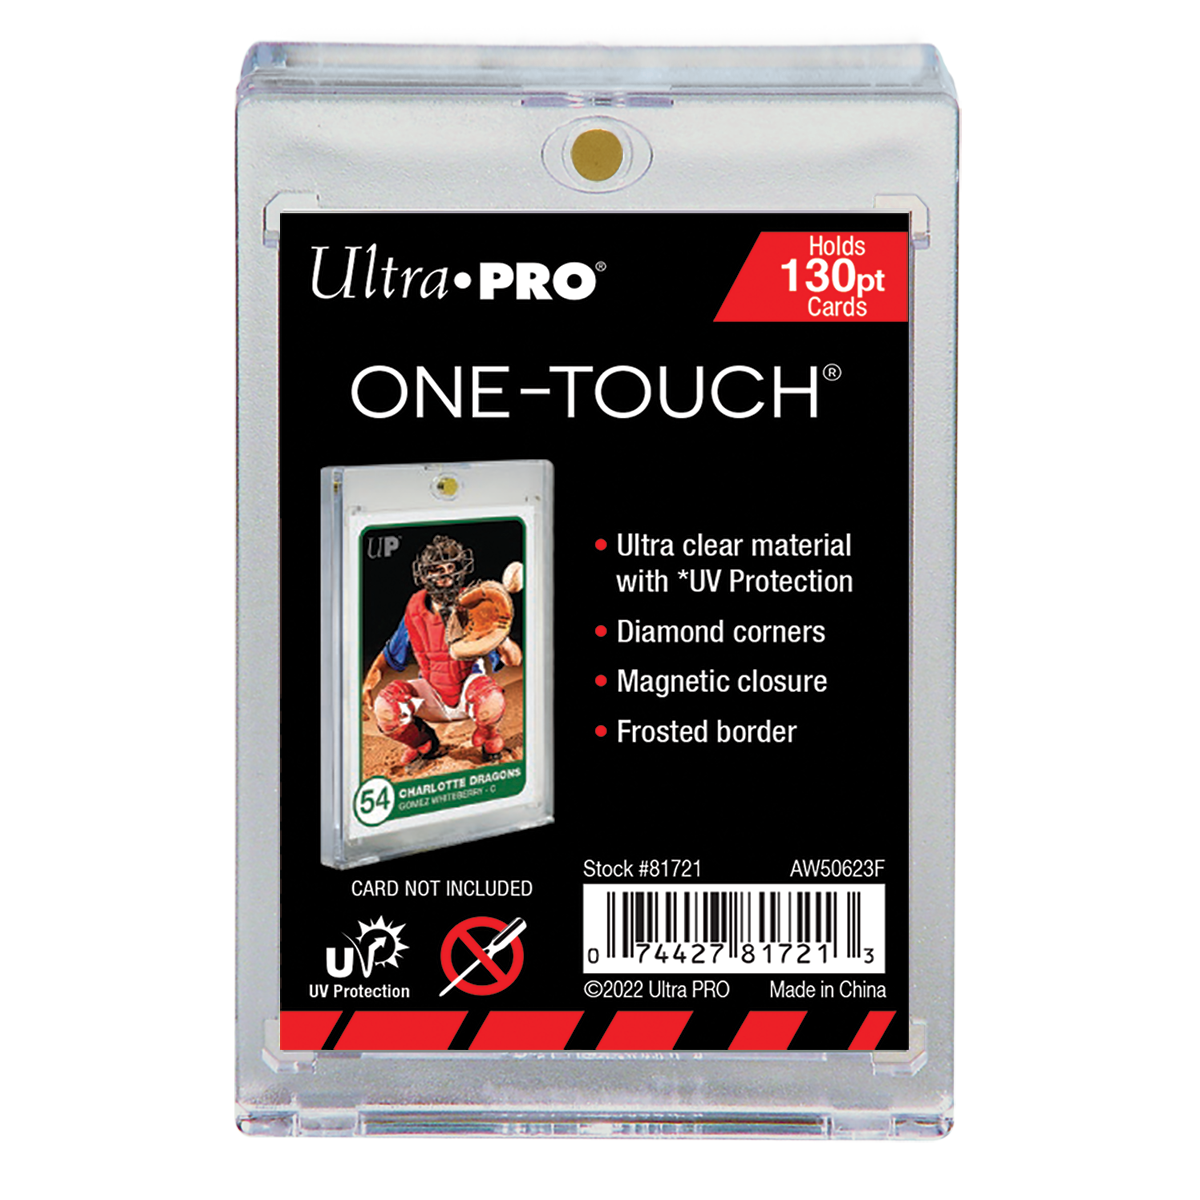  Ultra Pro 3 X 4 Super Thick 100PT Toploader 25ct : Toys &  Games